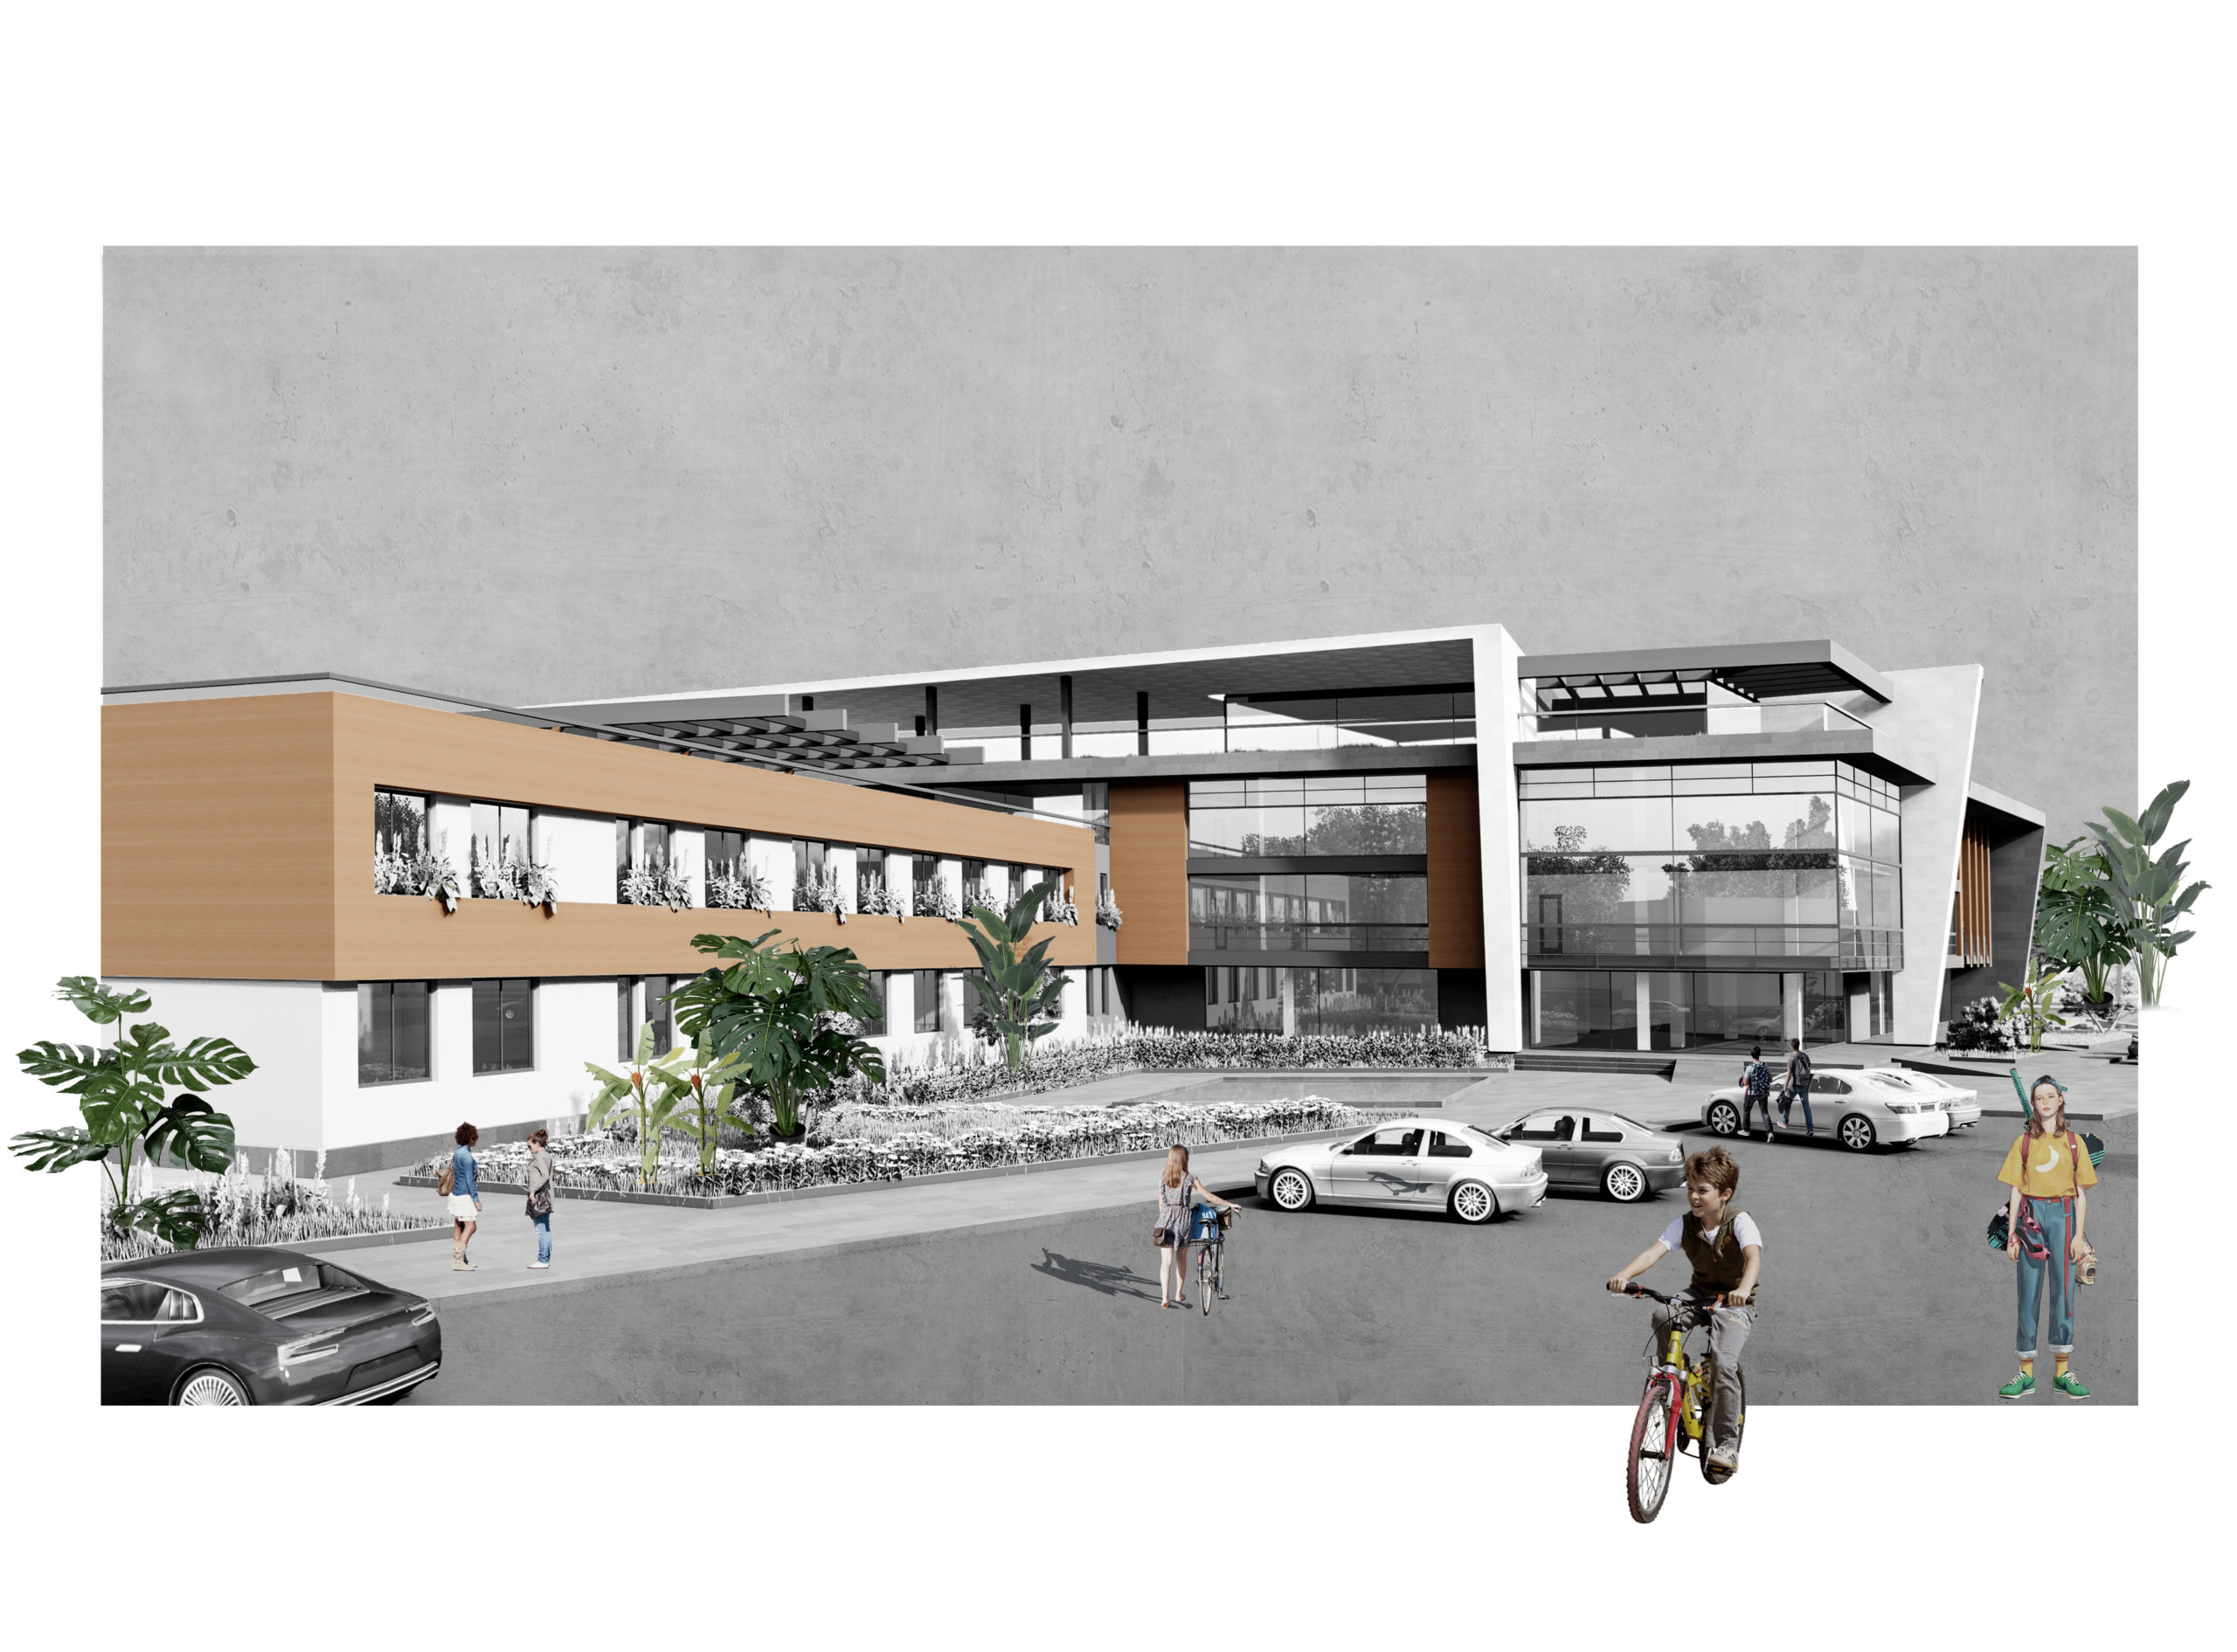 School N 149 Renovation and rethinking project - featured image